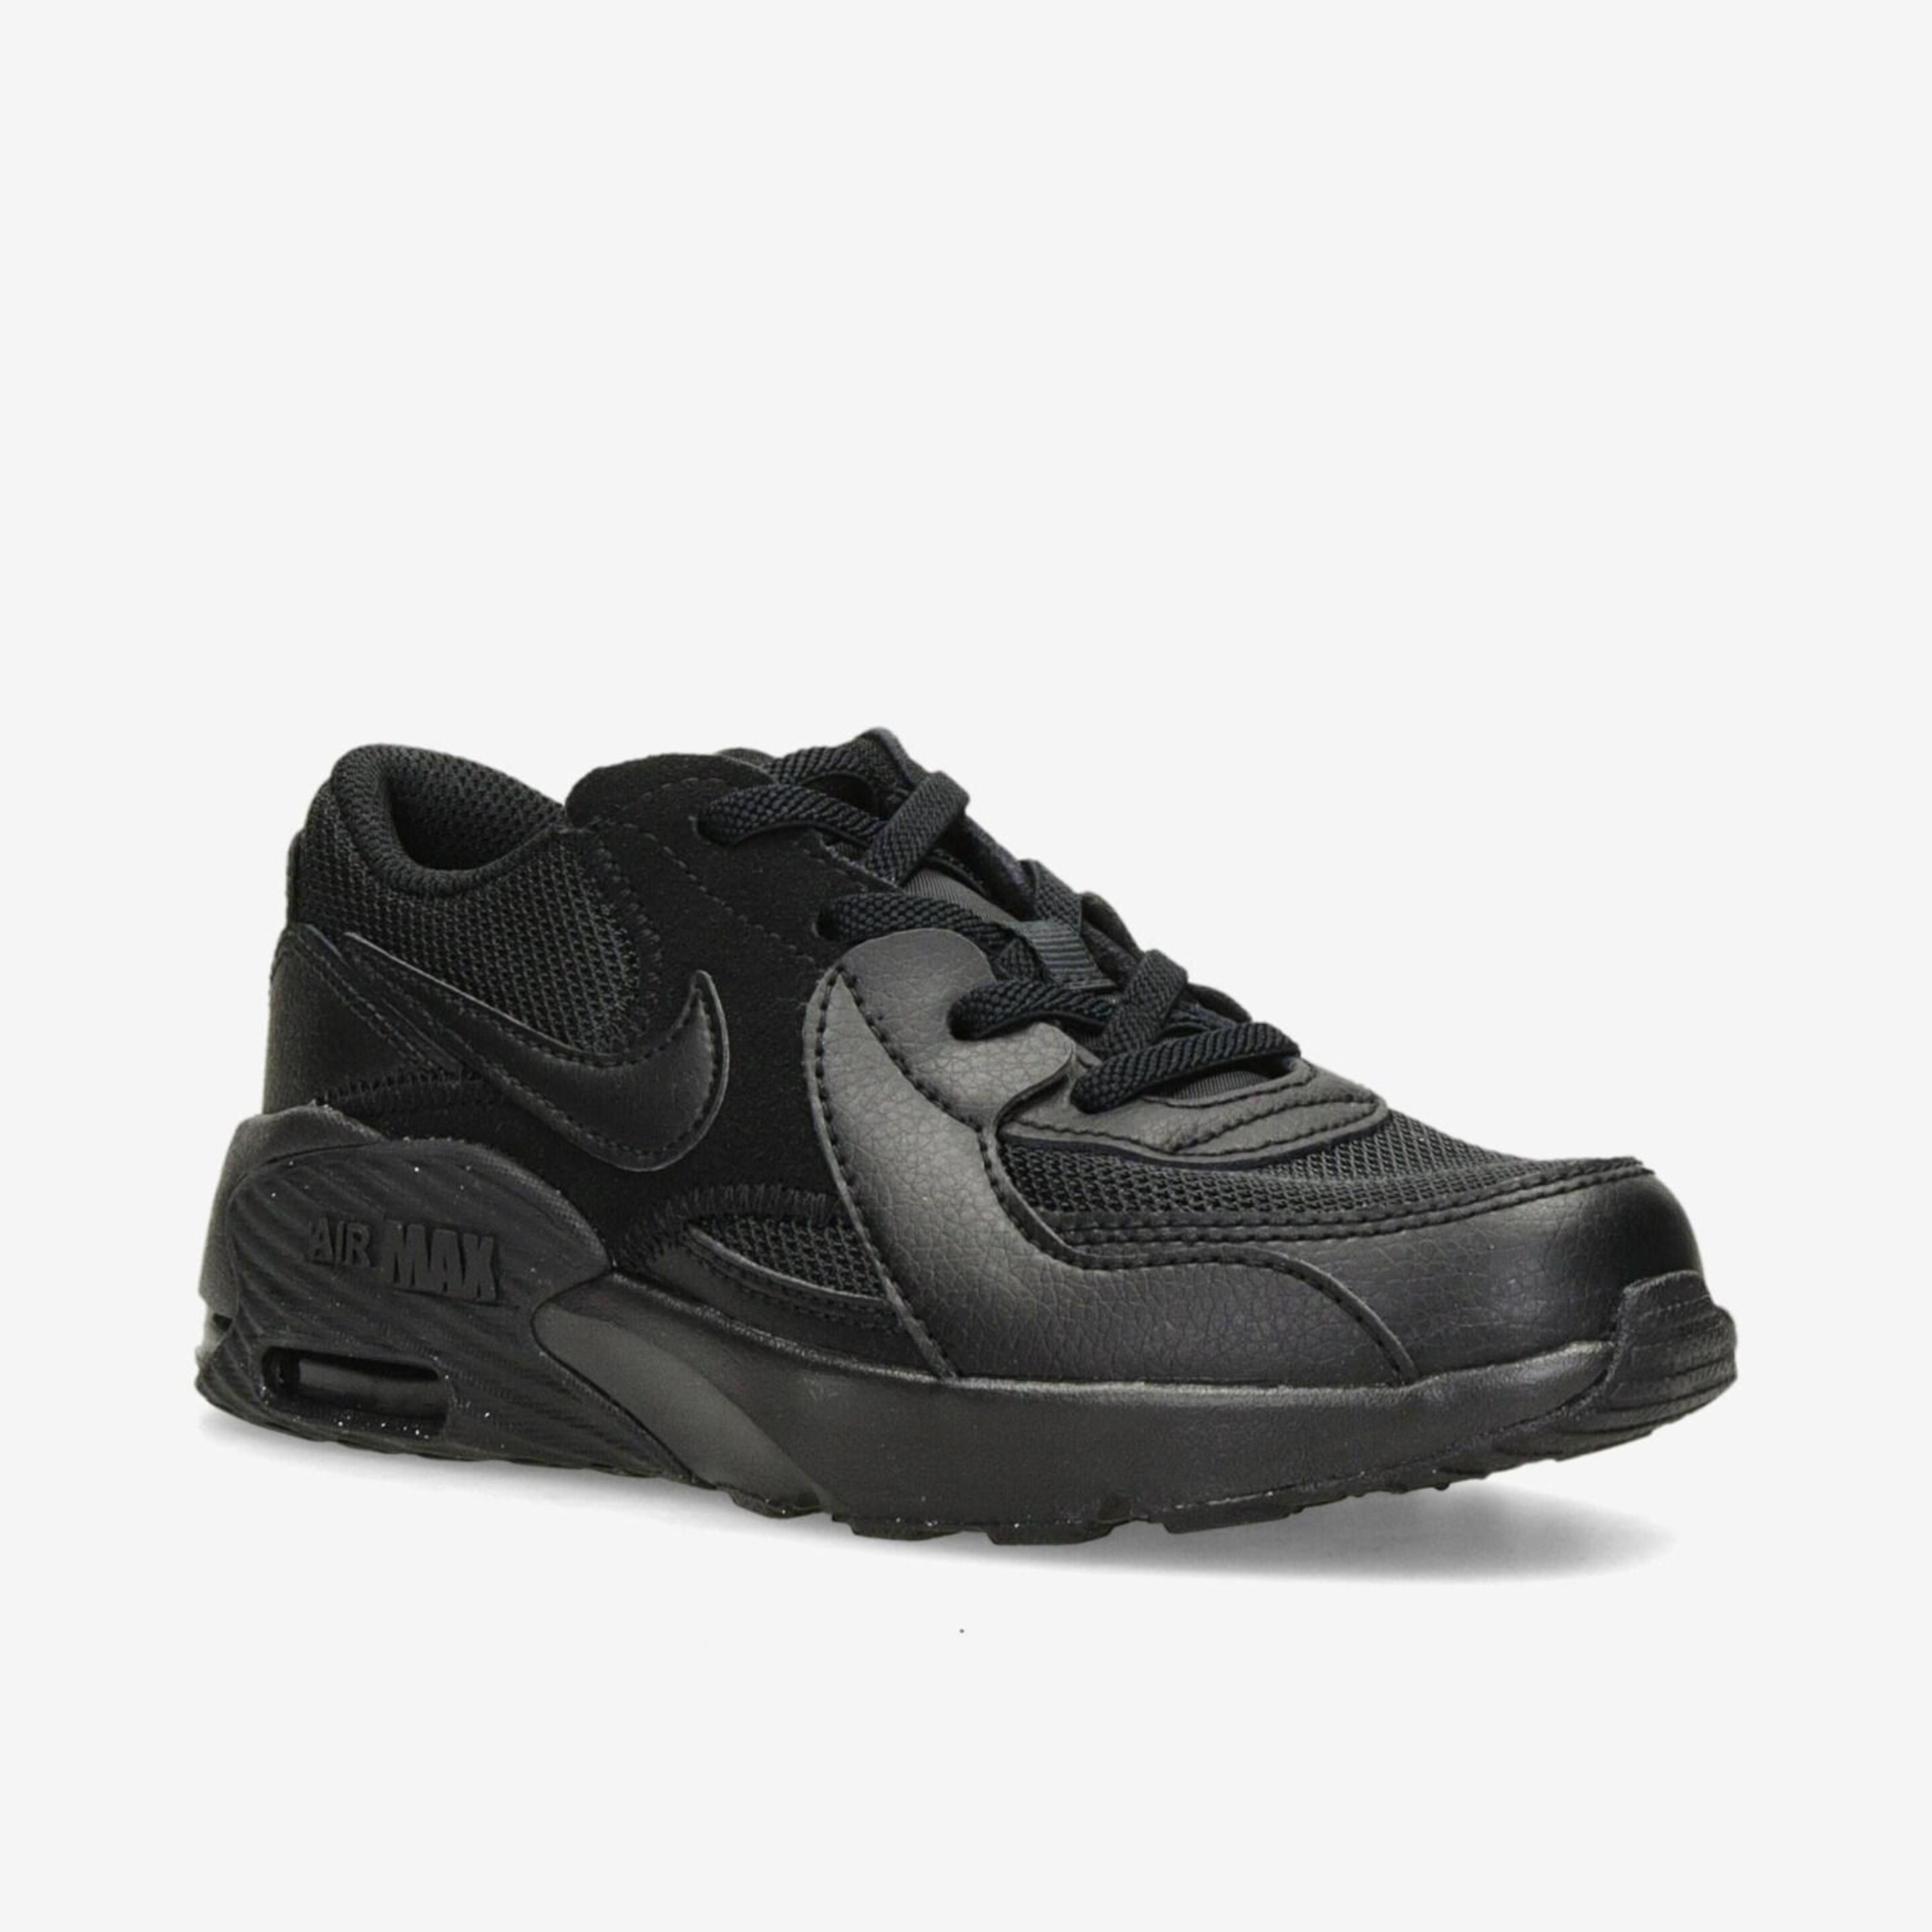 Air Max Excee Kid Dptvo Retrorunning C. Aire Cord